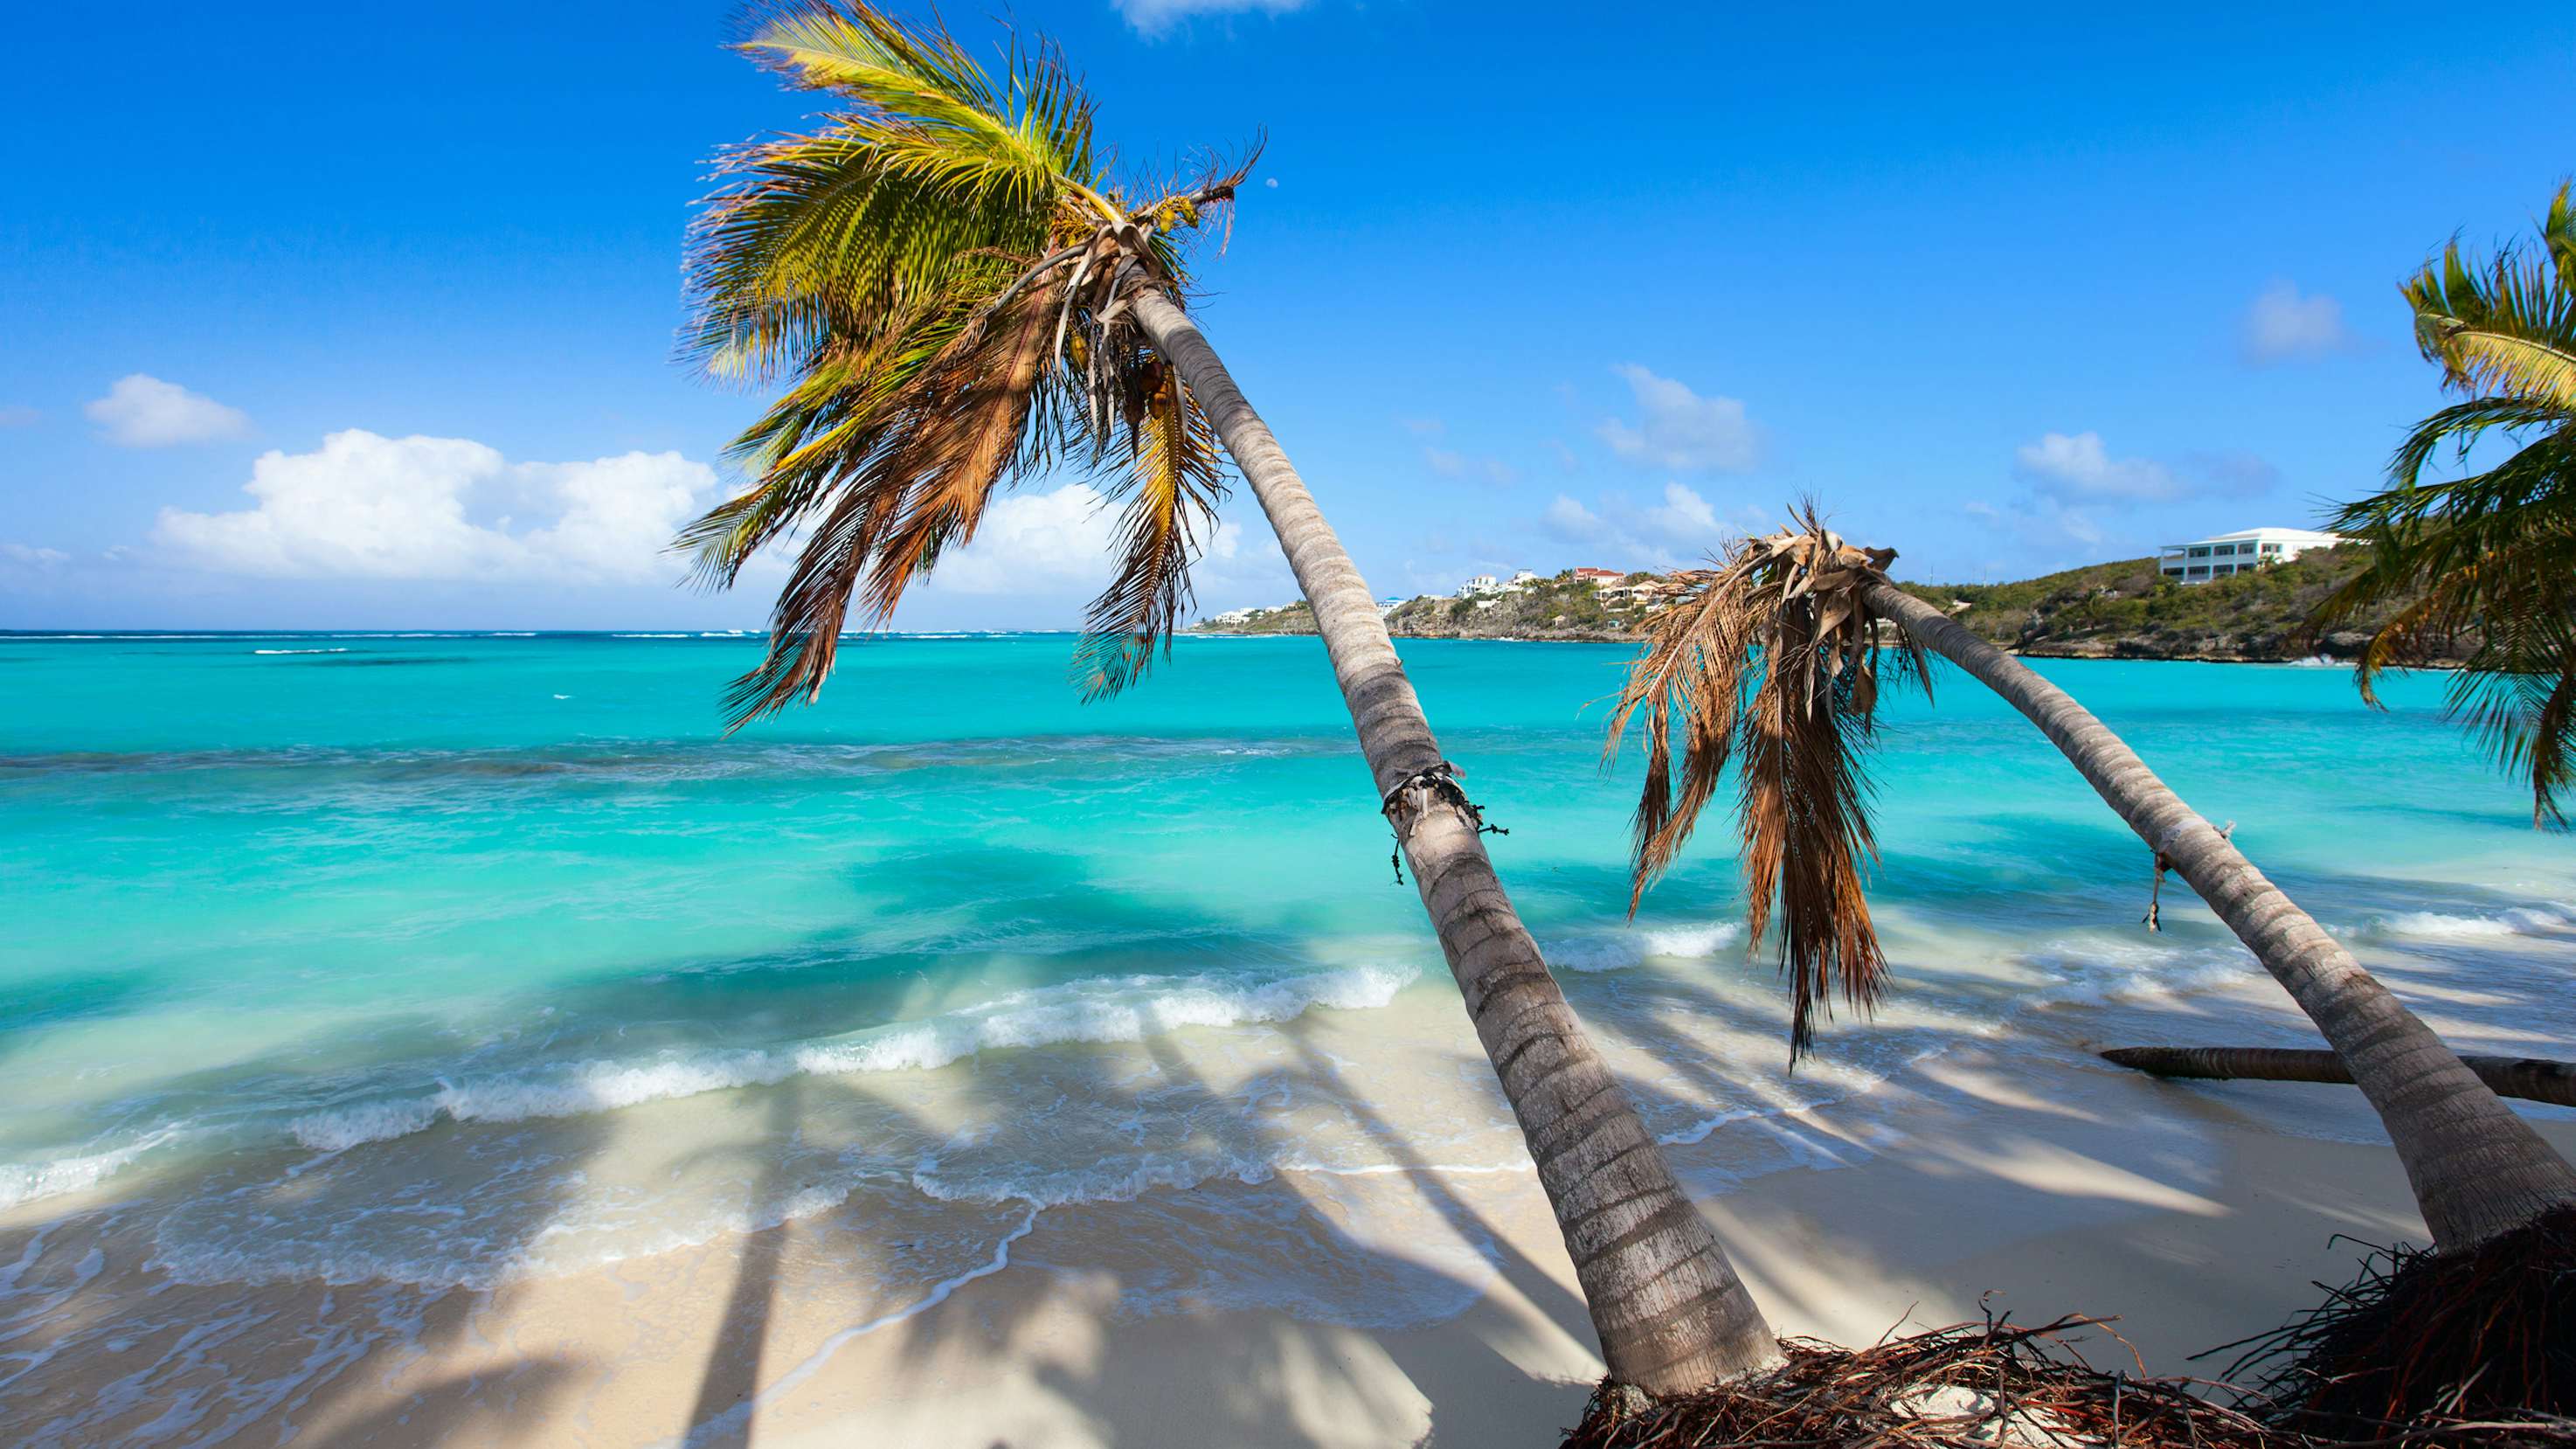 A stunning view of Anguilla in the Caribbean Leeward, with palmtrees, white sandy beach, and inviting blue waters—truly the epitome of the best yacht charter destination.